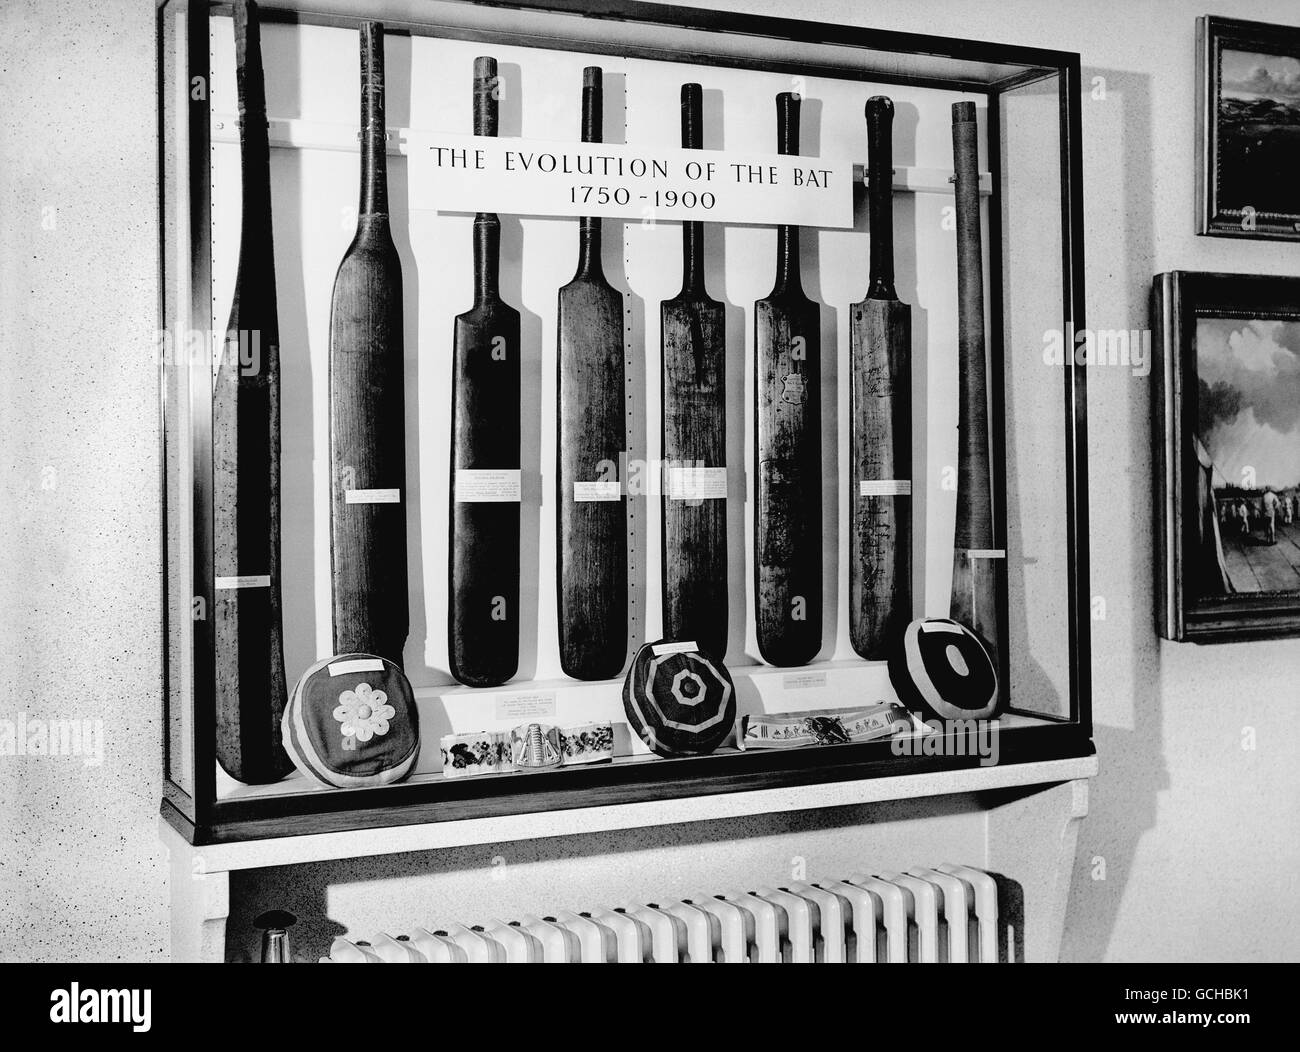 Imperial Cricket Memorial Gallery at Lord's Cricket Ground. The Evolution  of the cricket bat 1750 - 1900 Stock Photo - Alamy